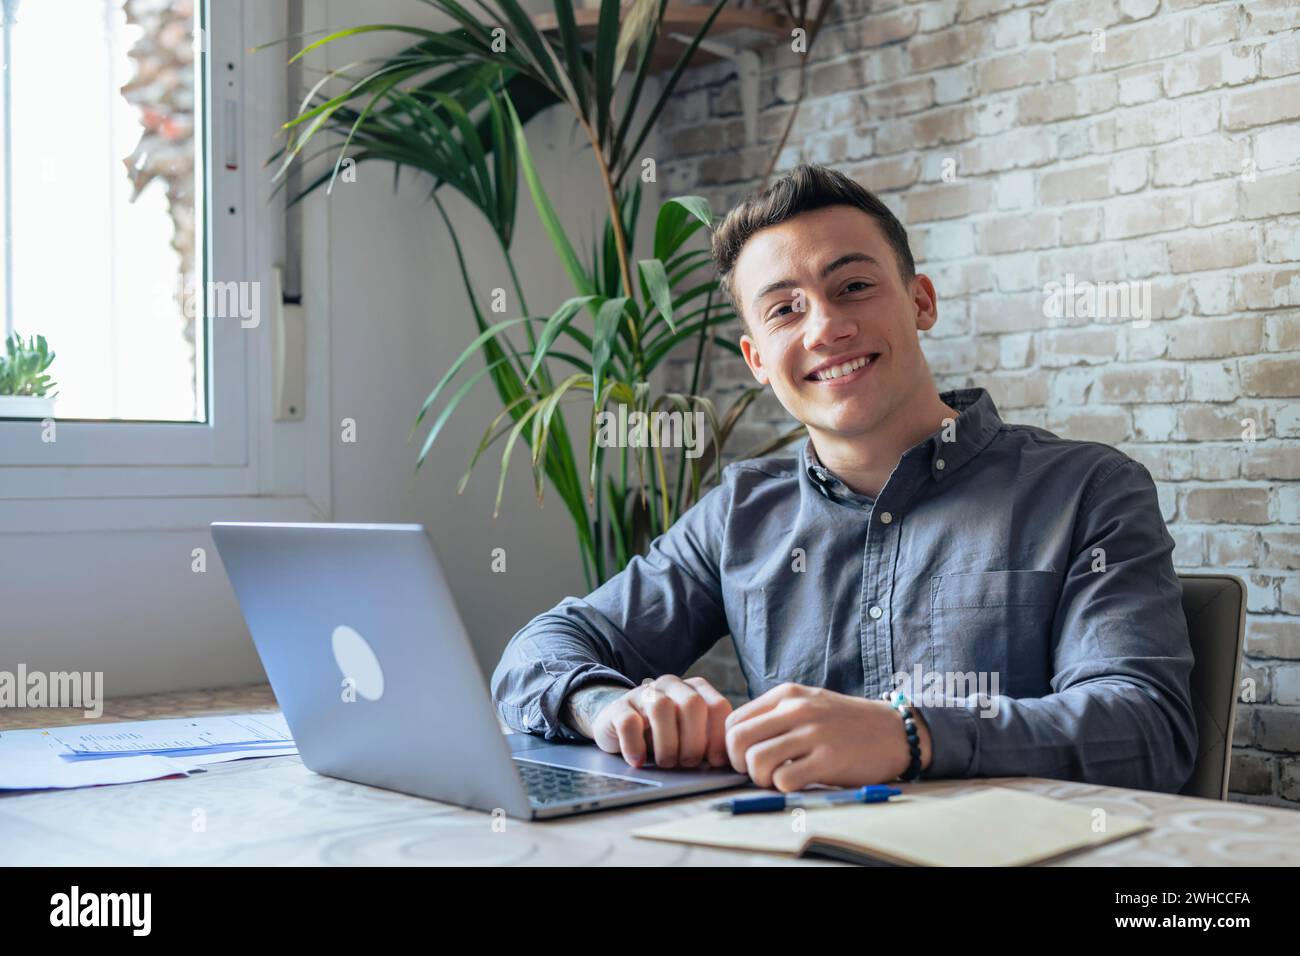 Good-looking millennial office employee in glasses sitting at desk in front of laptop smiling looking at camera. Successful worker, career advance and opportunity, owner of prosperous business concept Stock Photo